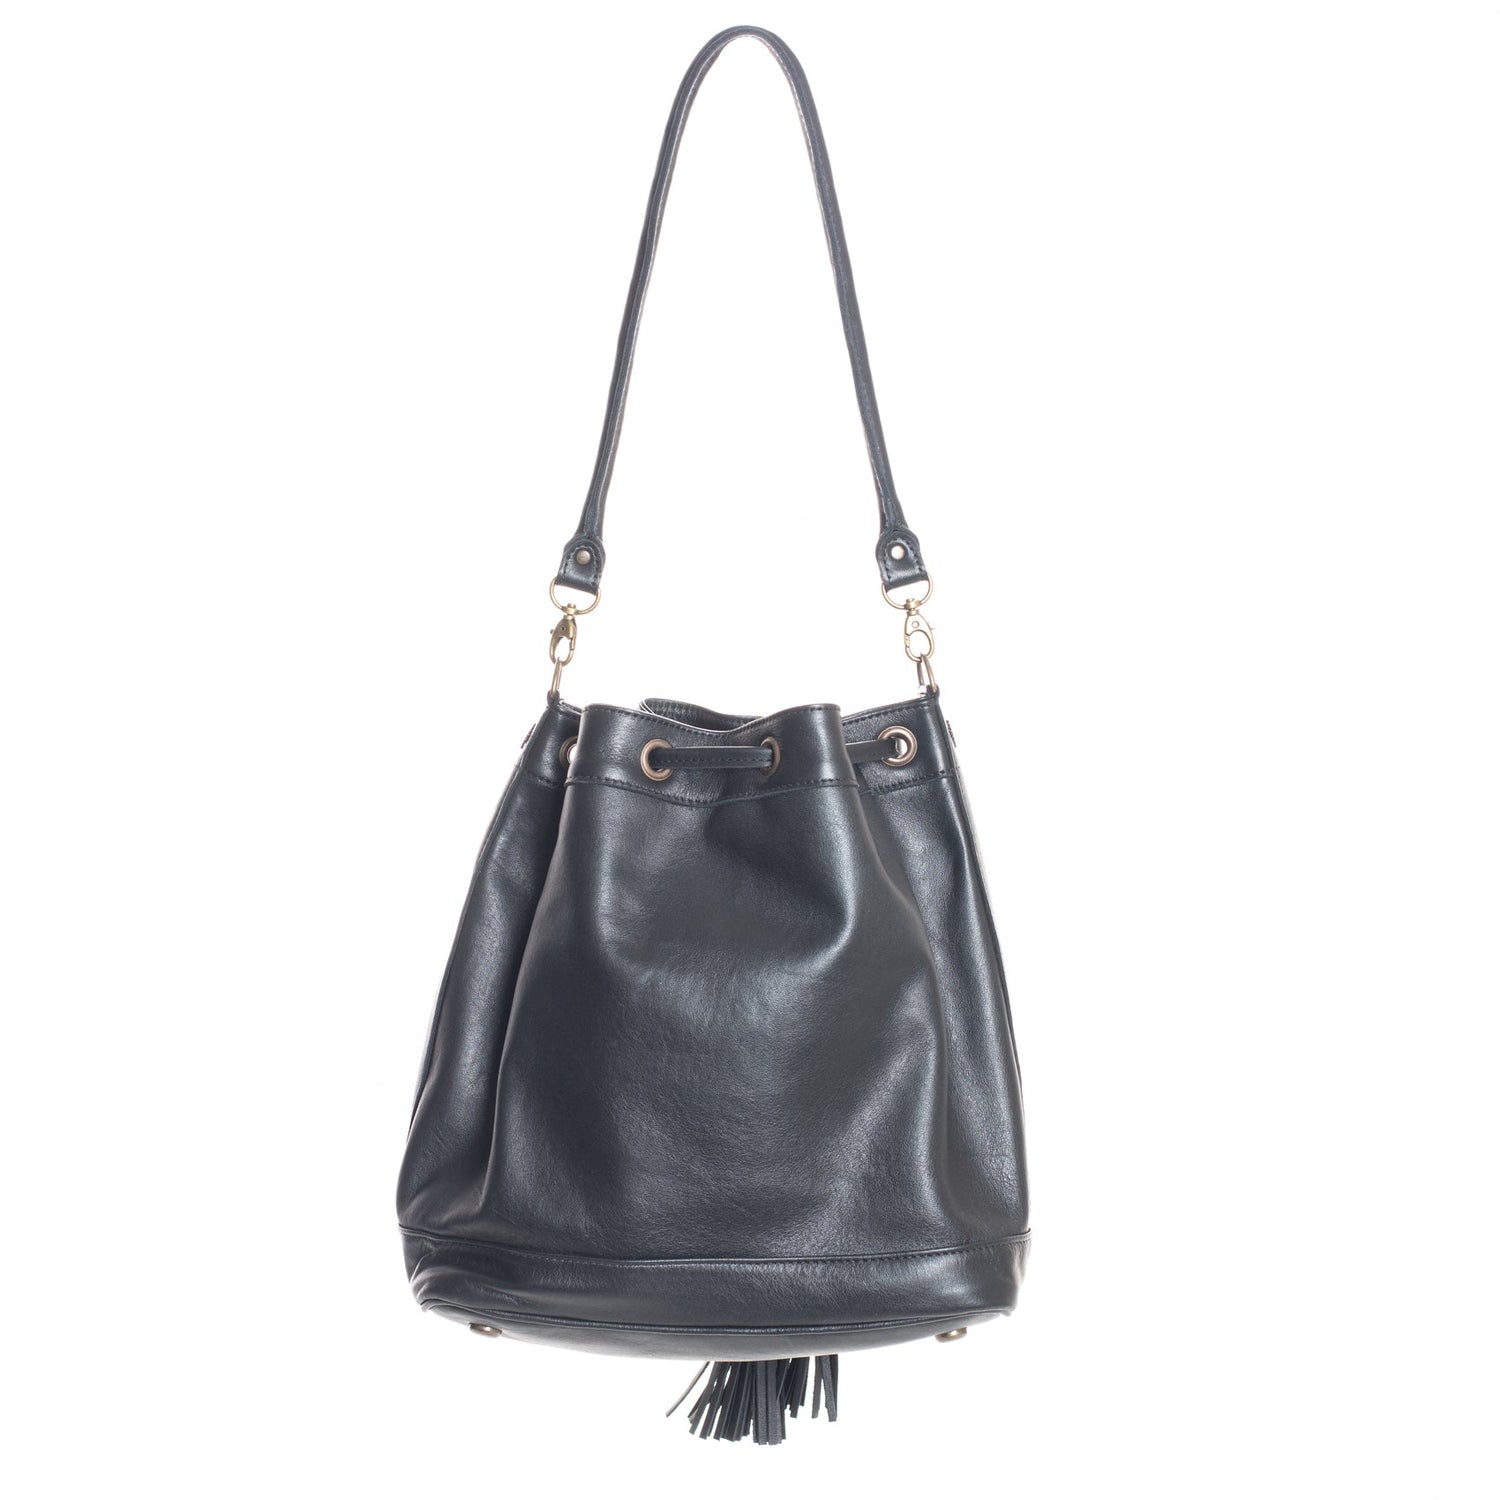 Co - Small Pebbled Leather Bucket Bag